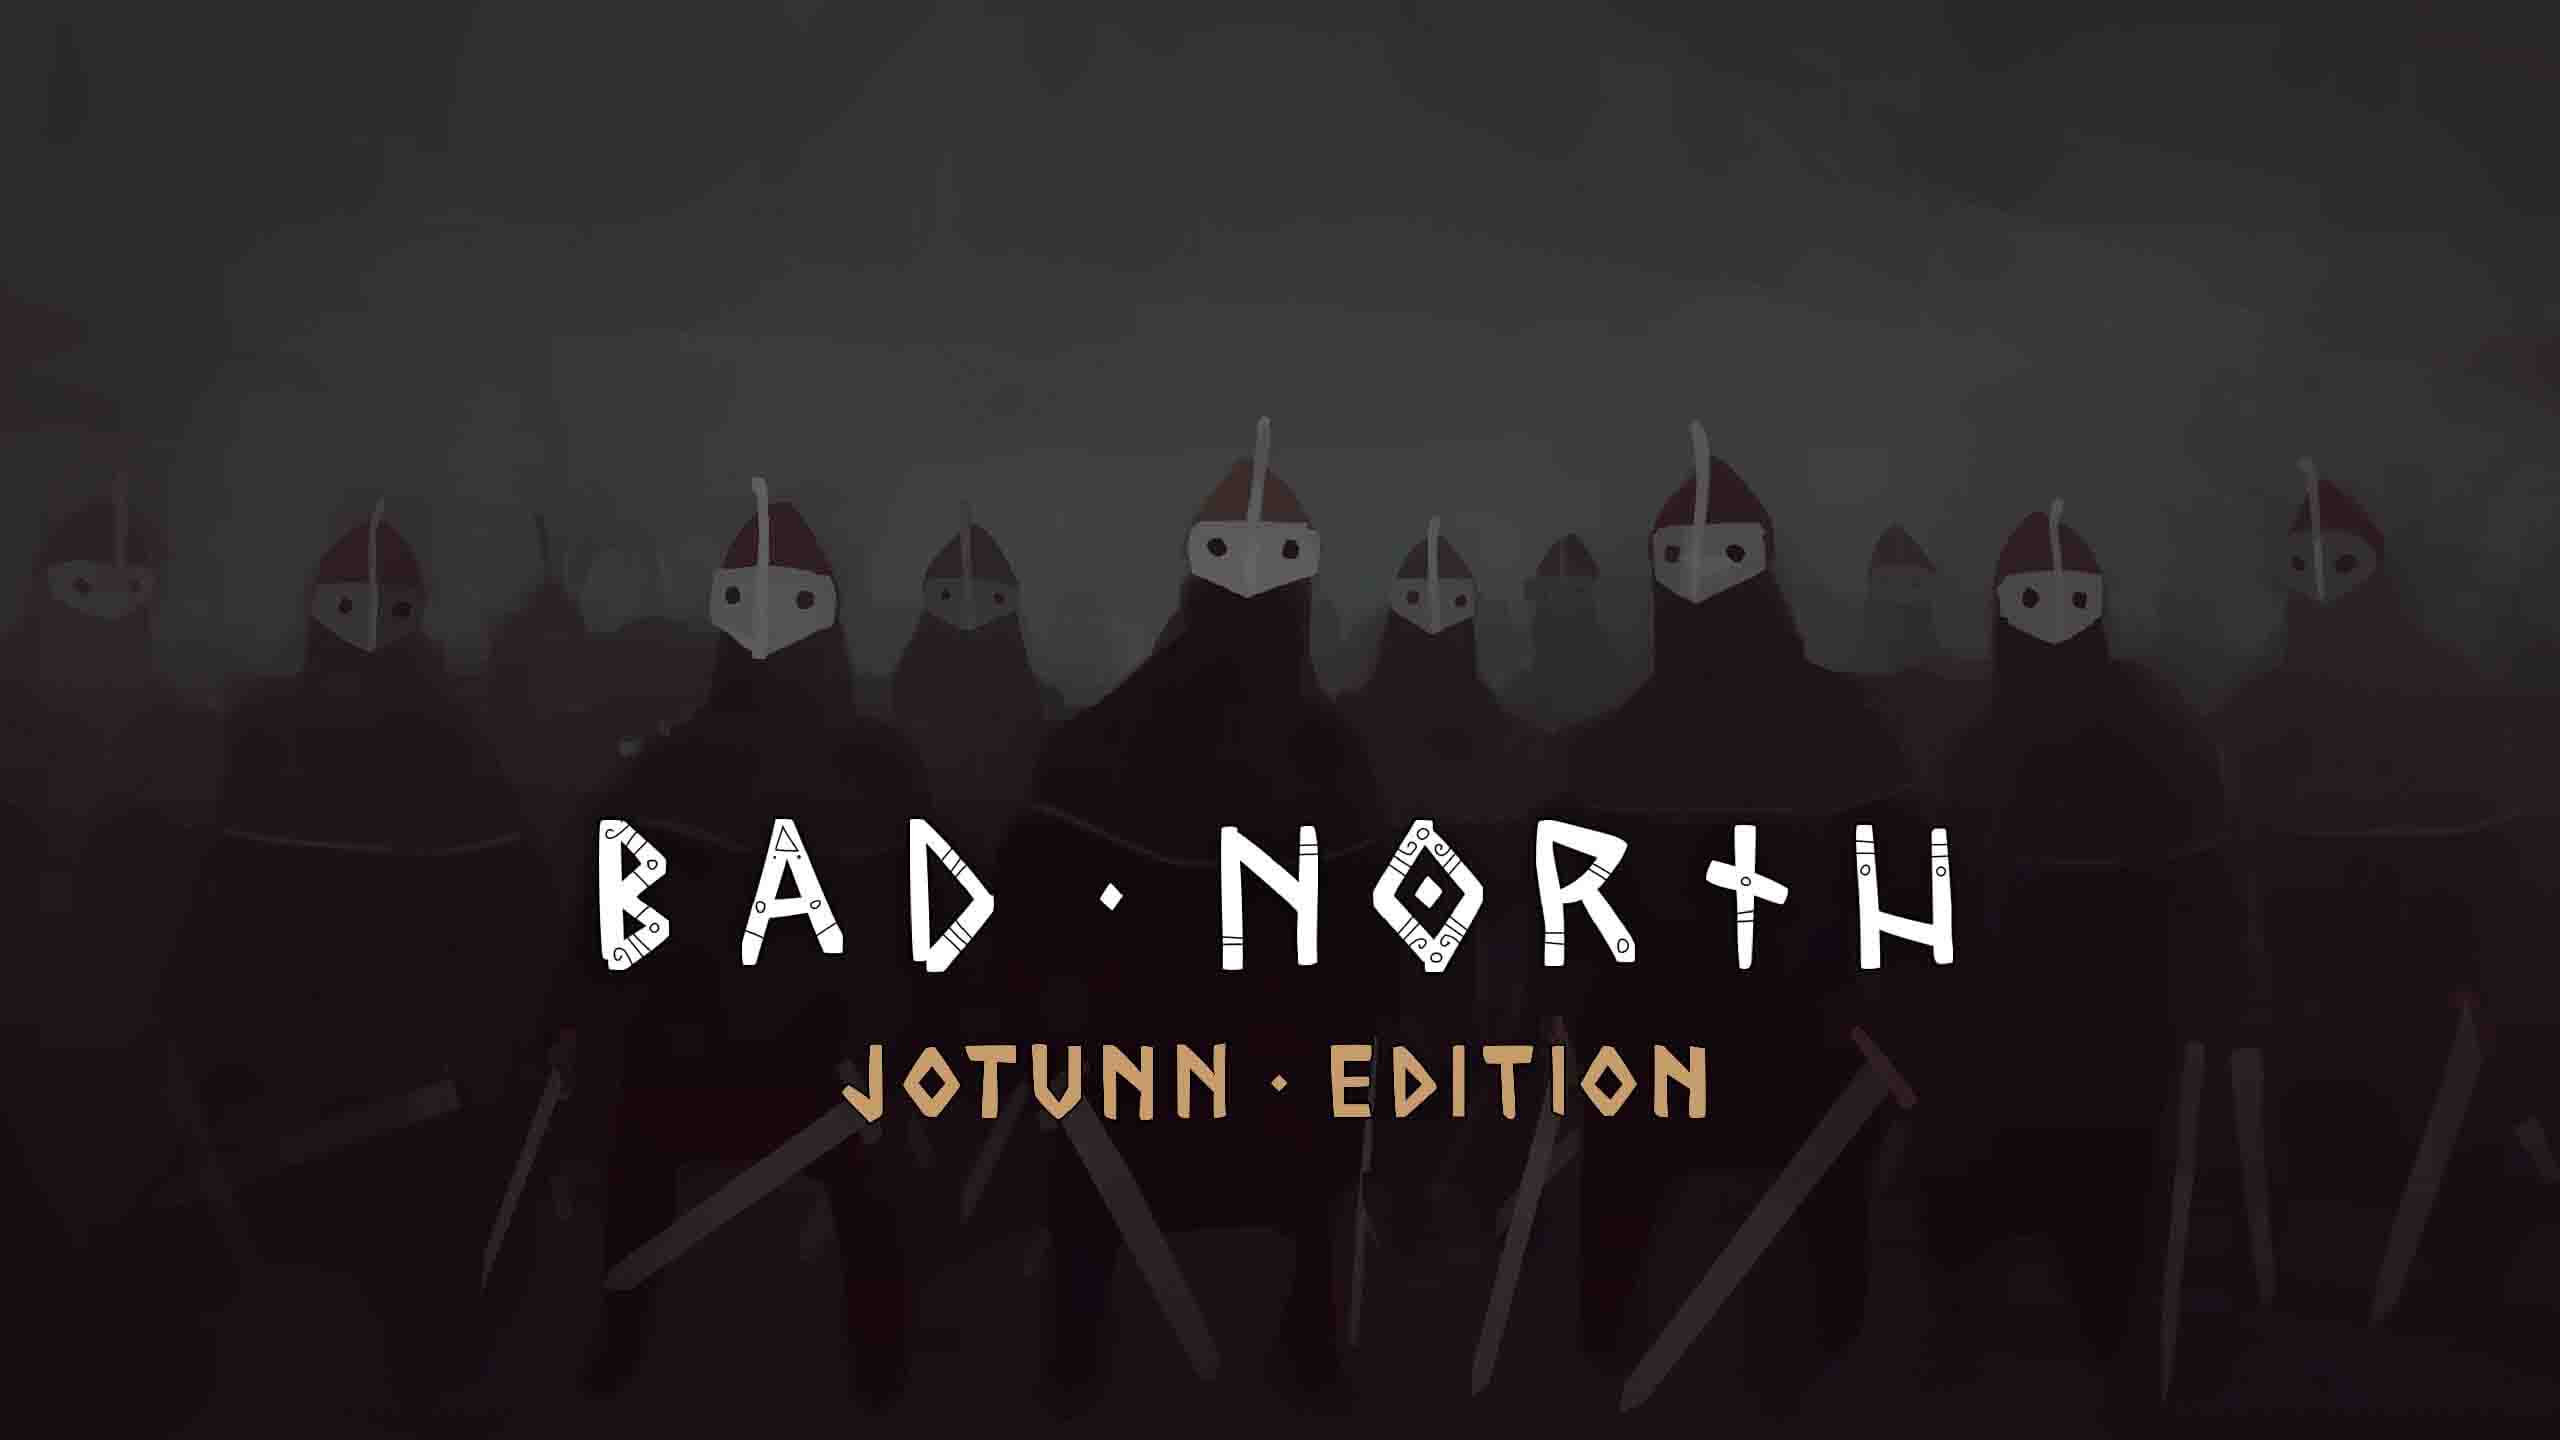 Bad North System Requirements for PC Games minimum, recommended specifications for Windows, CPU, OS, Processor, RAM Memory, Storage, and GPU.